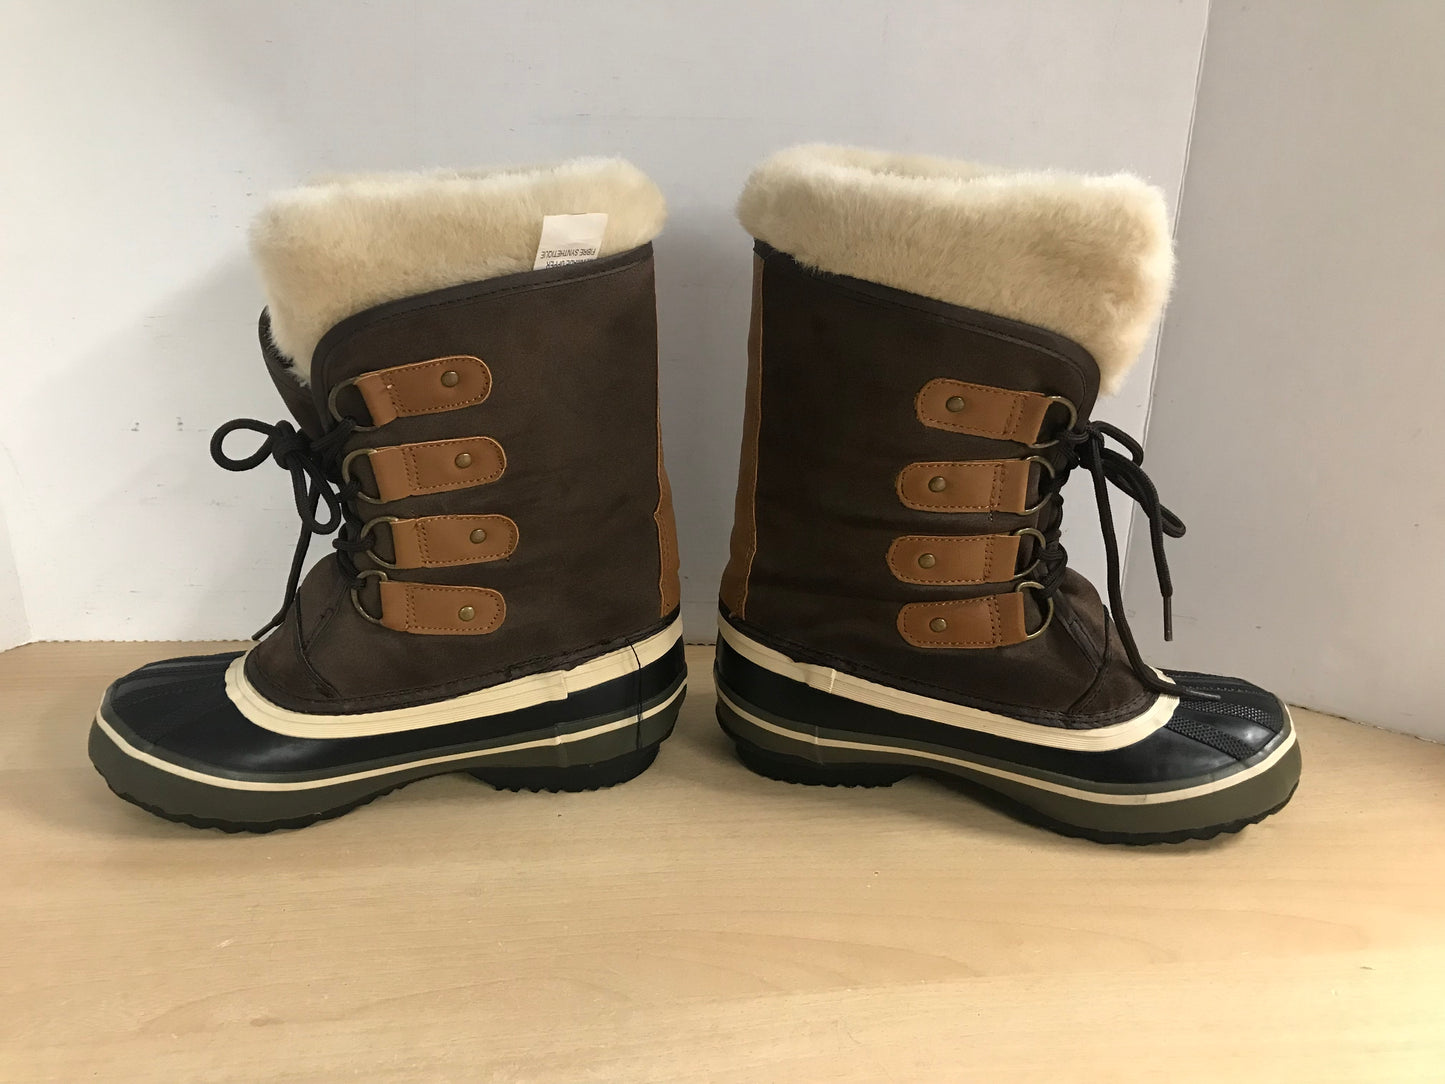 Winter Boots Ladies Size 6 Brown Suade With Liners New Demo Model